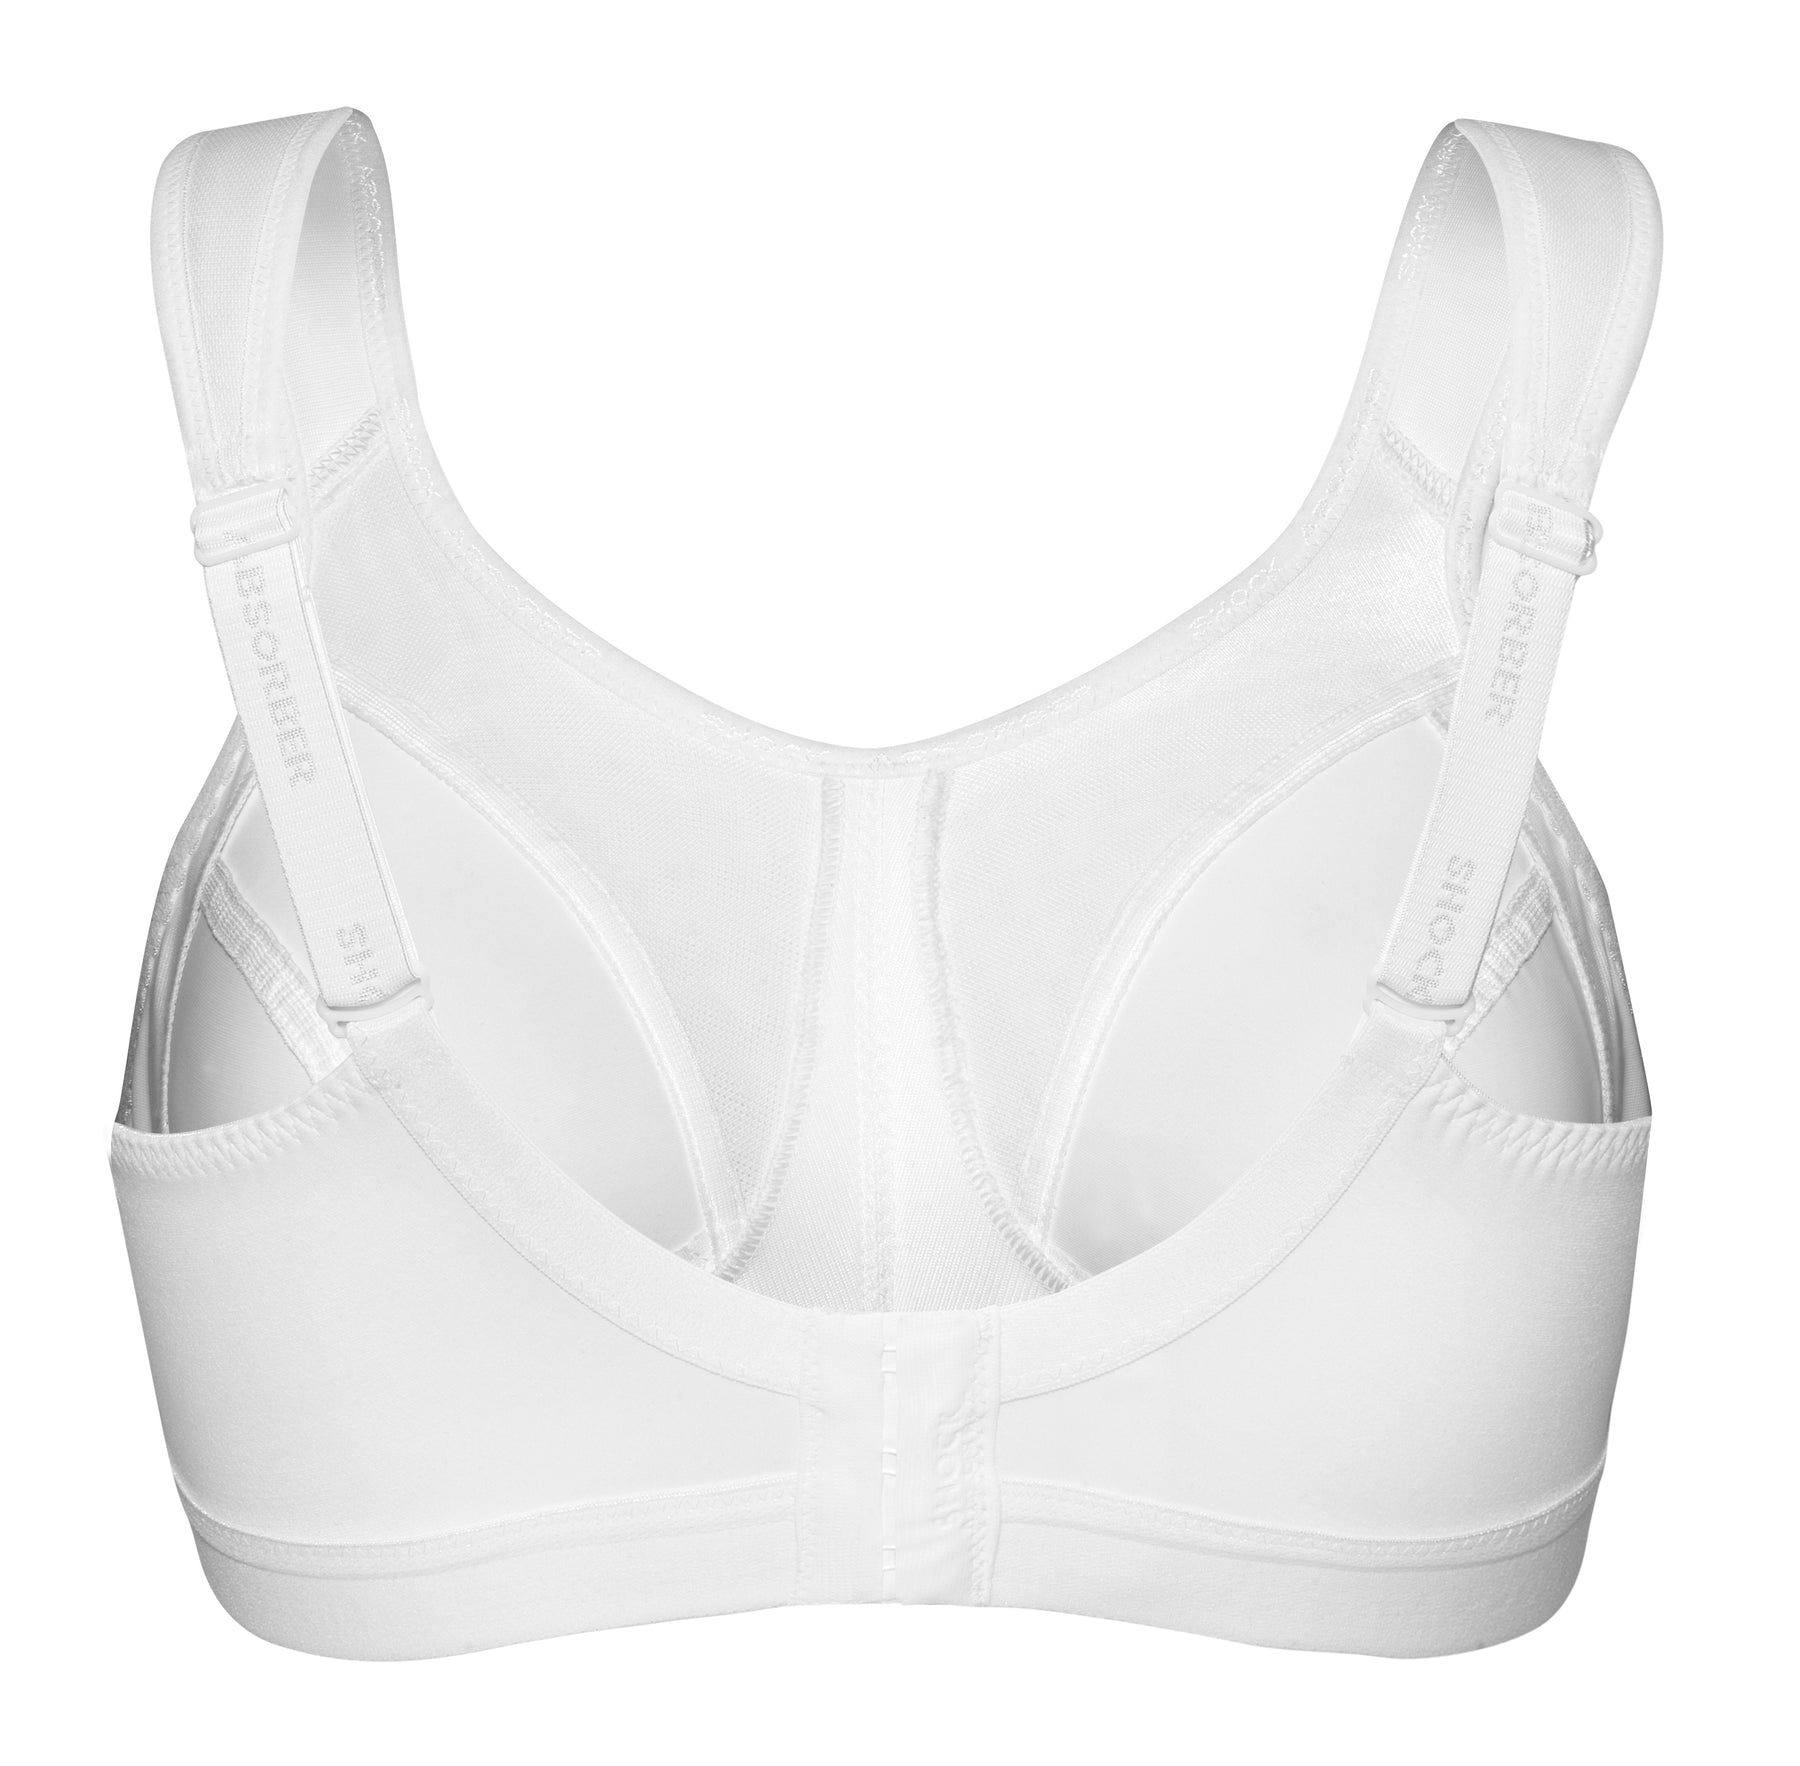 Ladies Sports Bra (with Extender) LG555 White 40DD at